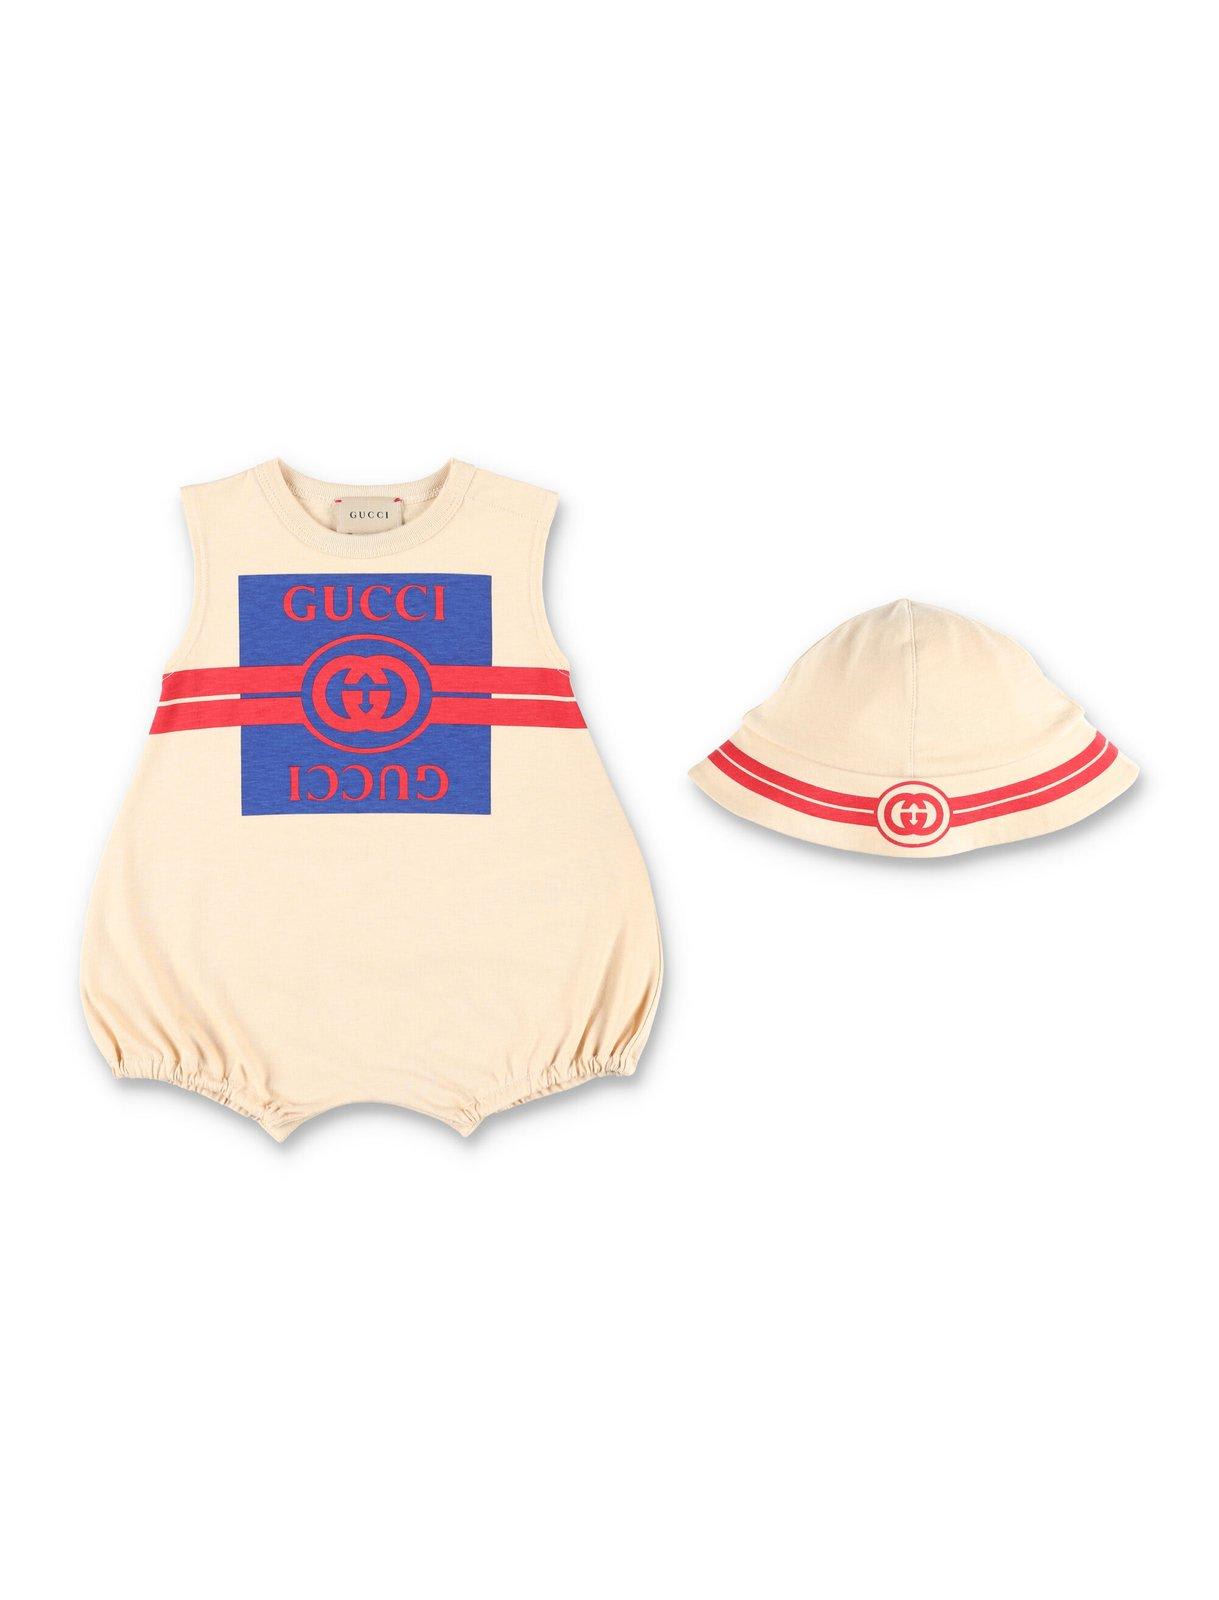 Gucci Babies' Jersey Gift Set In Bianco